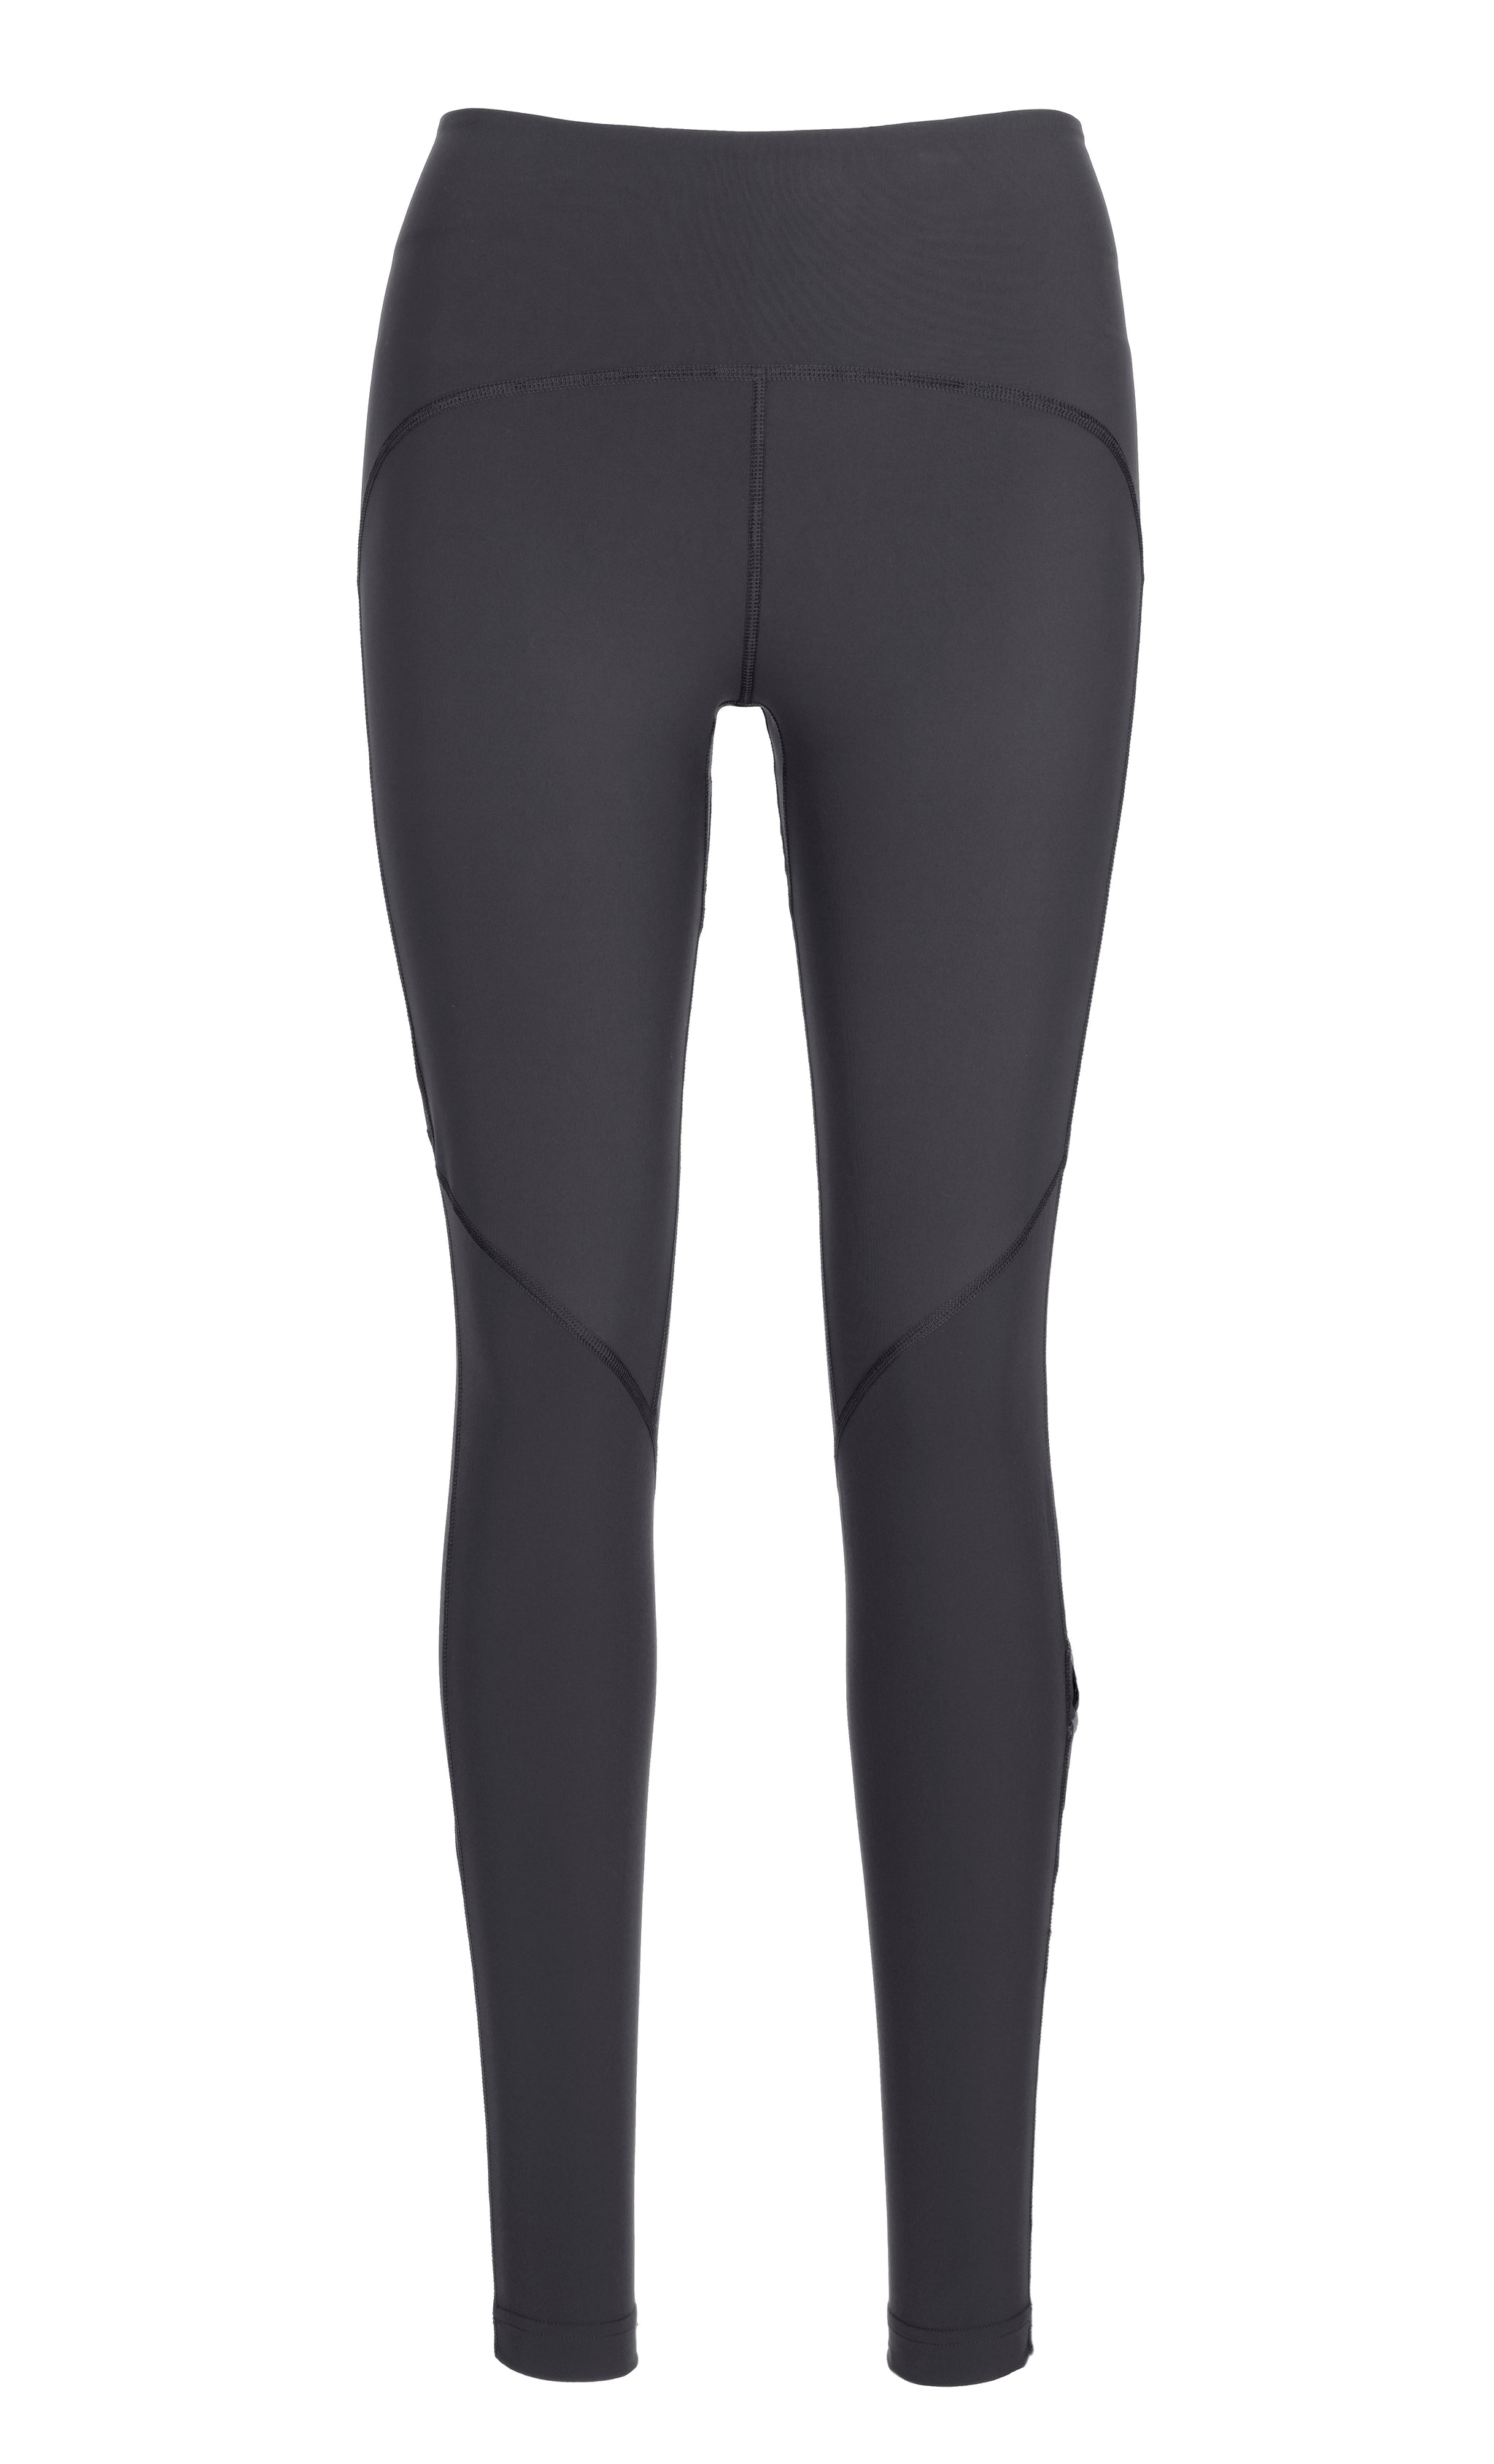 Rab Women's Metron Tights - Outfitters Store